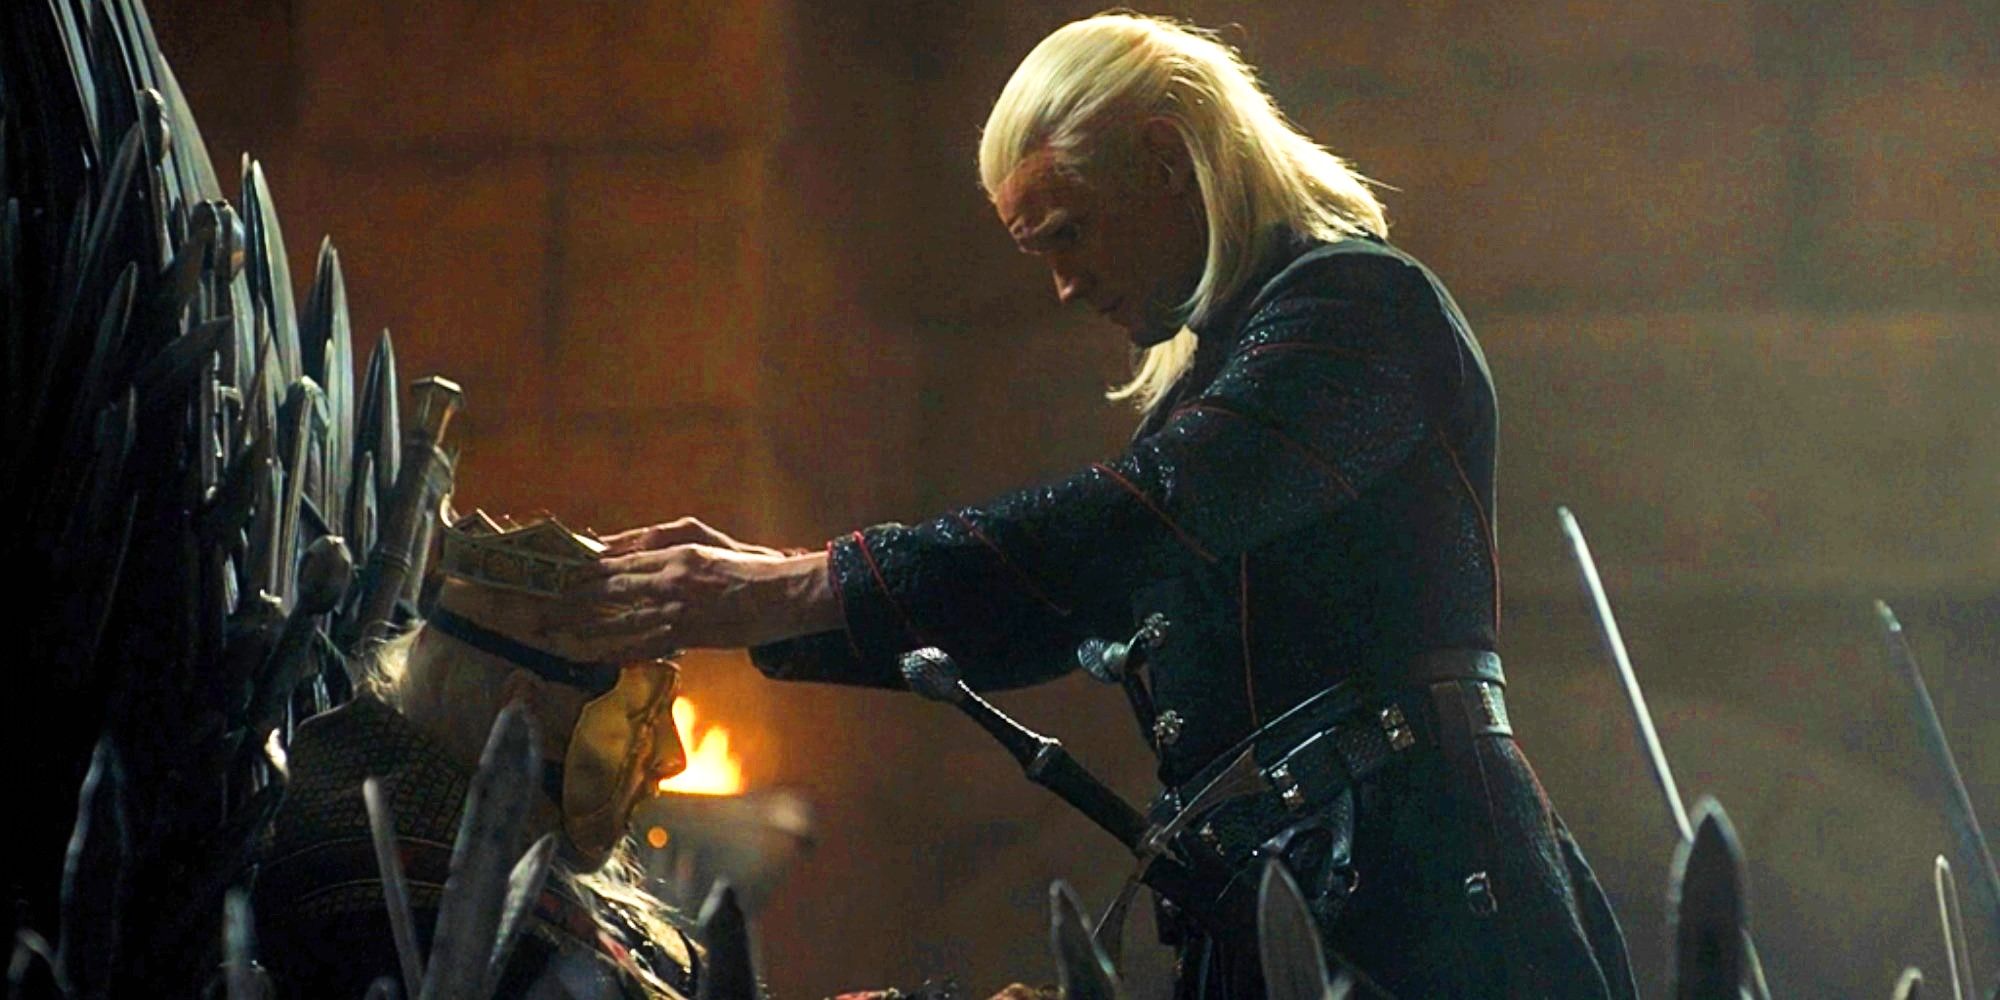 Daemon & Viserys’ Iron Throne Moment Makes Their First HOTD Fight Worse